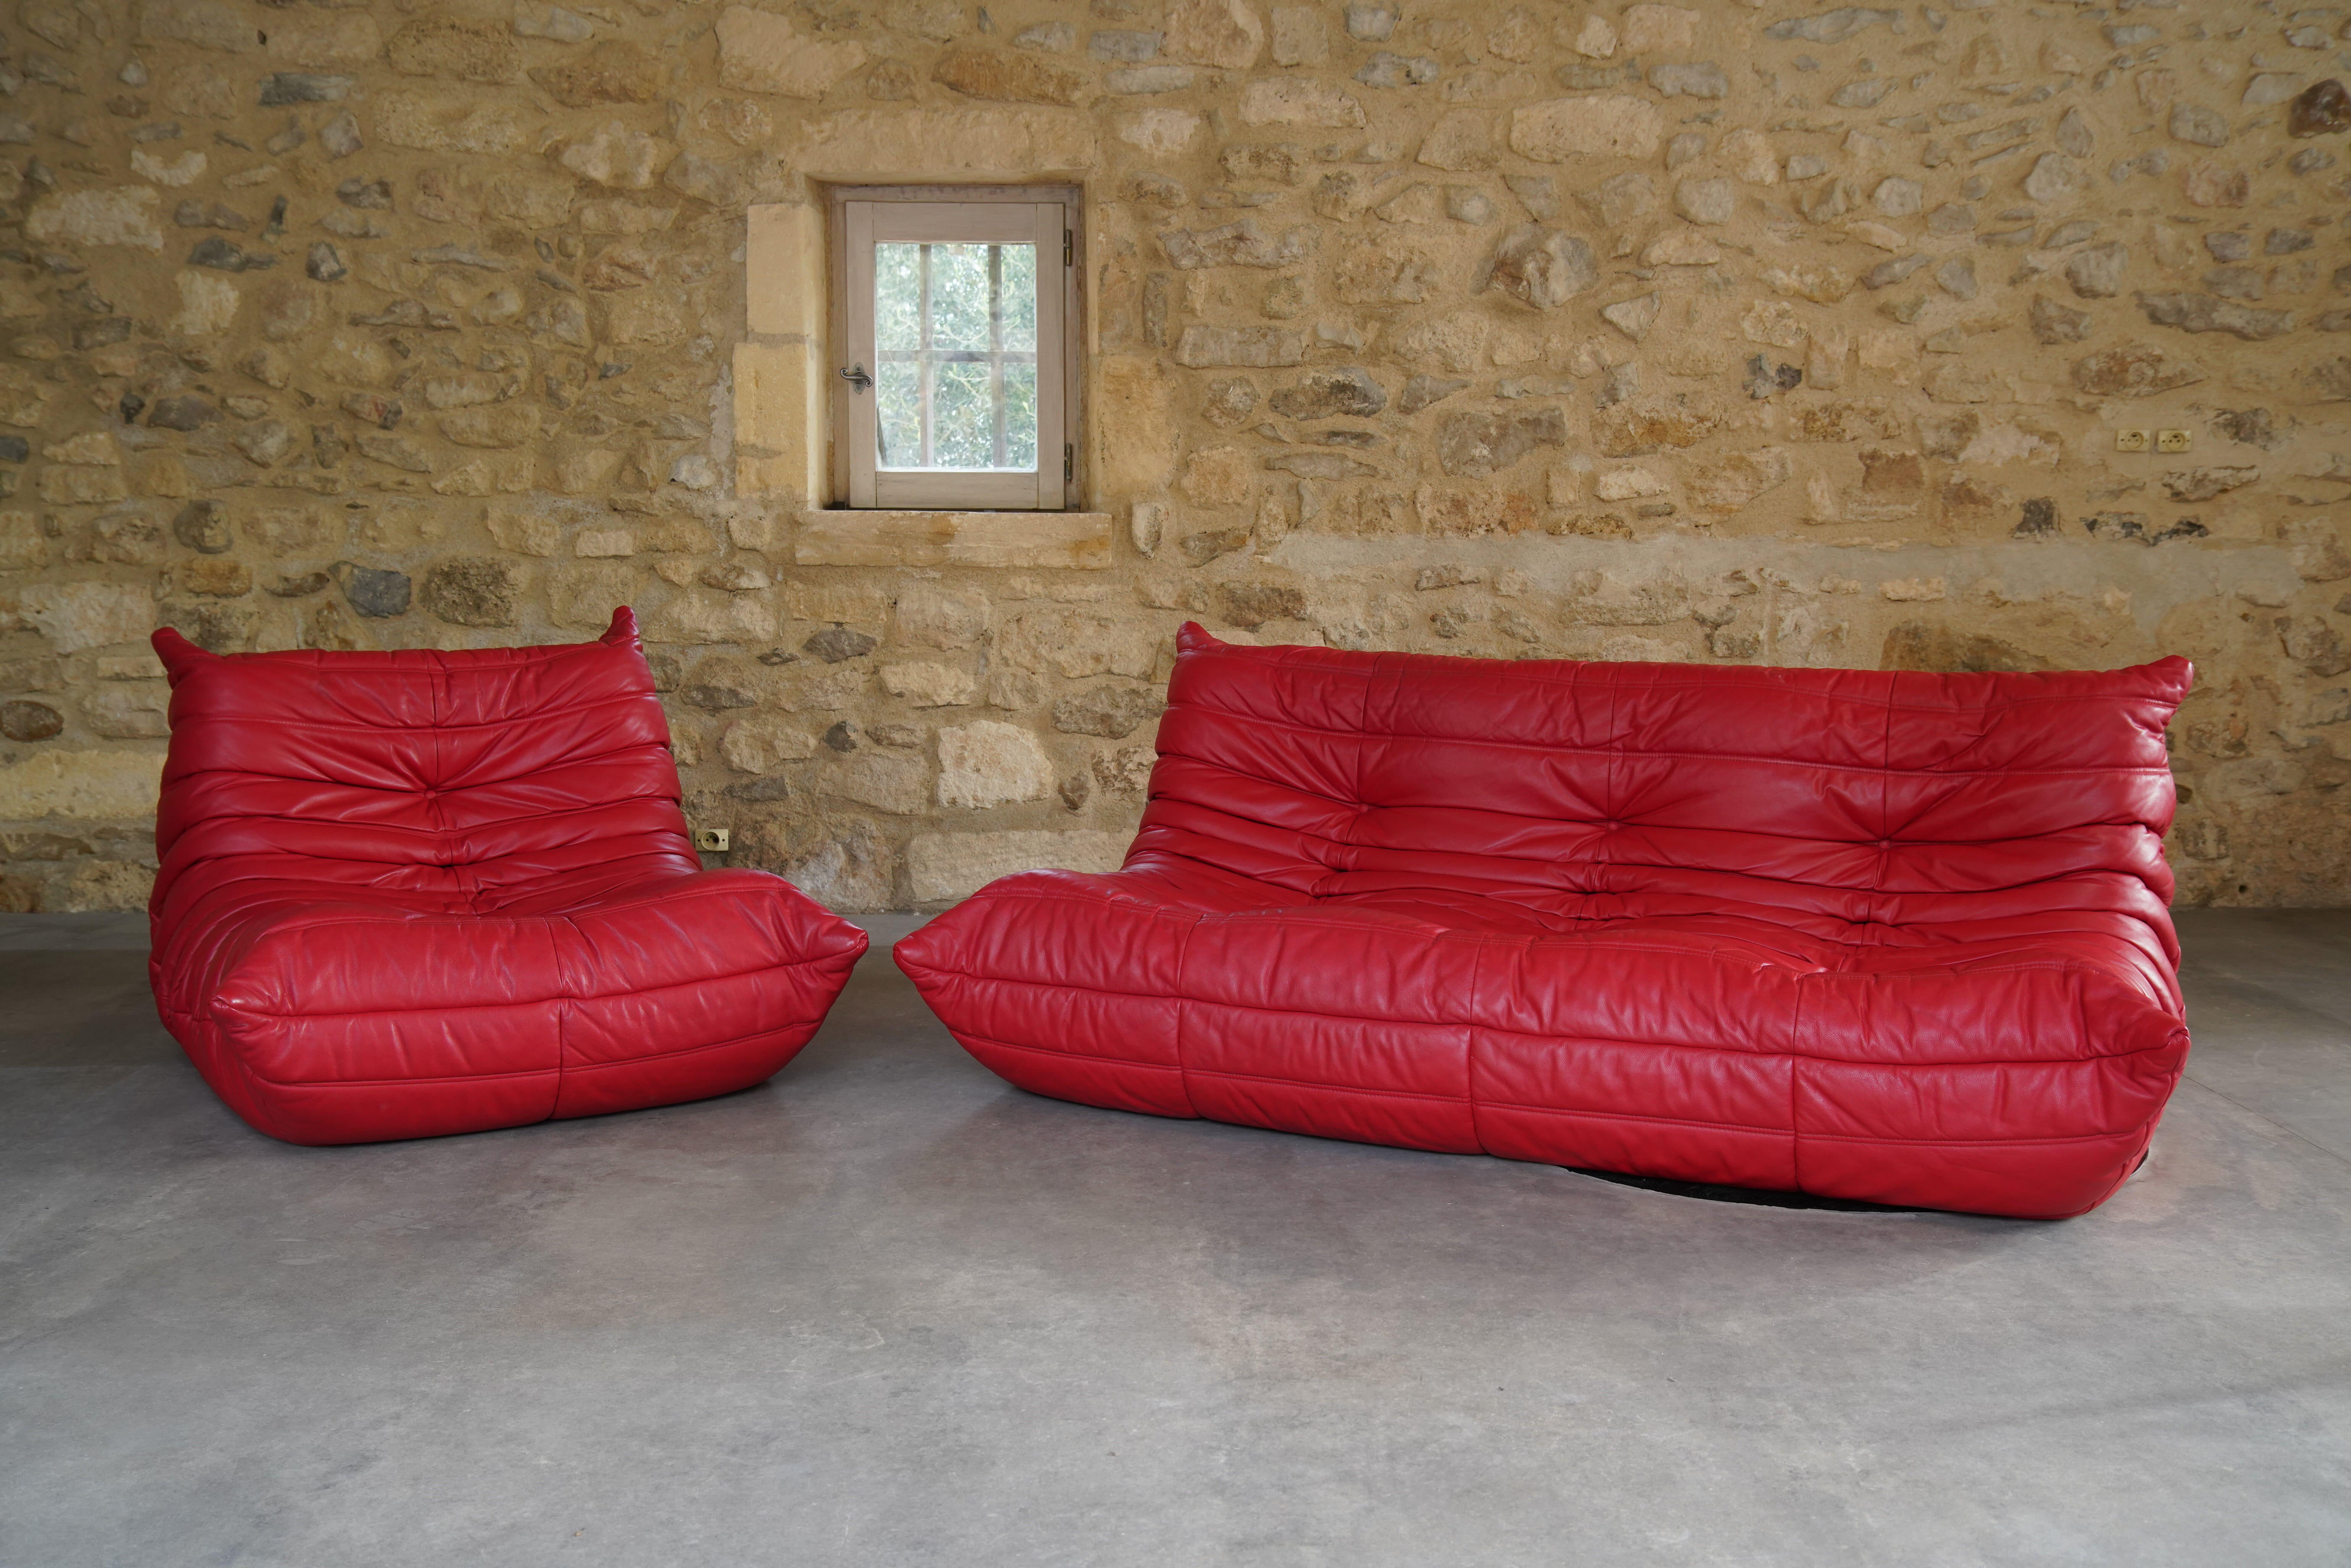 Beautiful red leather Togo three-seater sofa and chair designed by Michel Ducaroy for Ligne Roset from 2007.

Designer Michel Ducaroy drew inspiration for the Togo's design from an aluminum toothpaste tube noticing it “folded back on itself like a